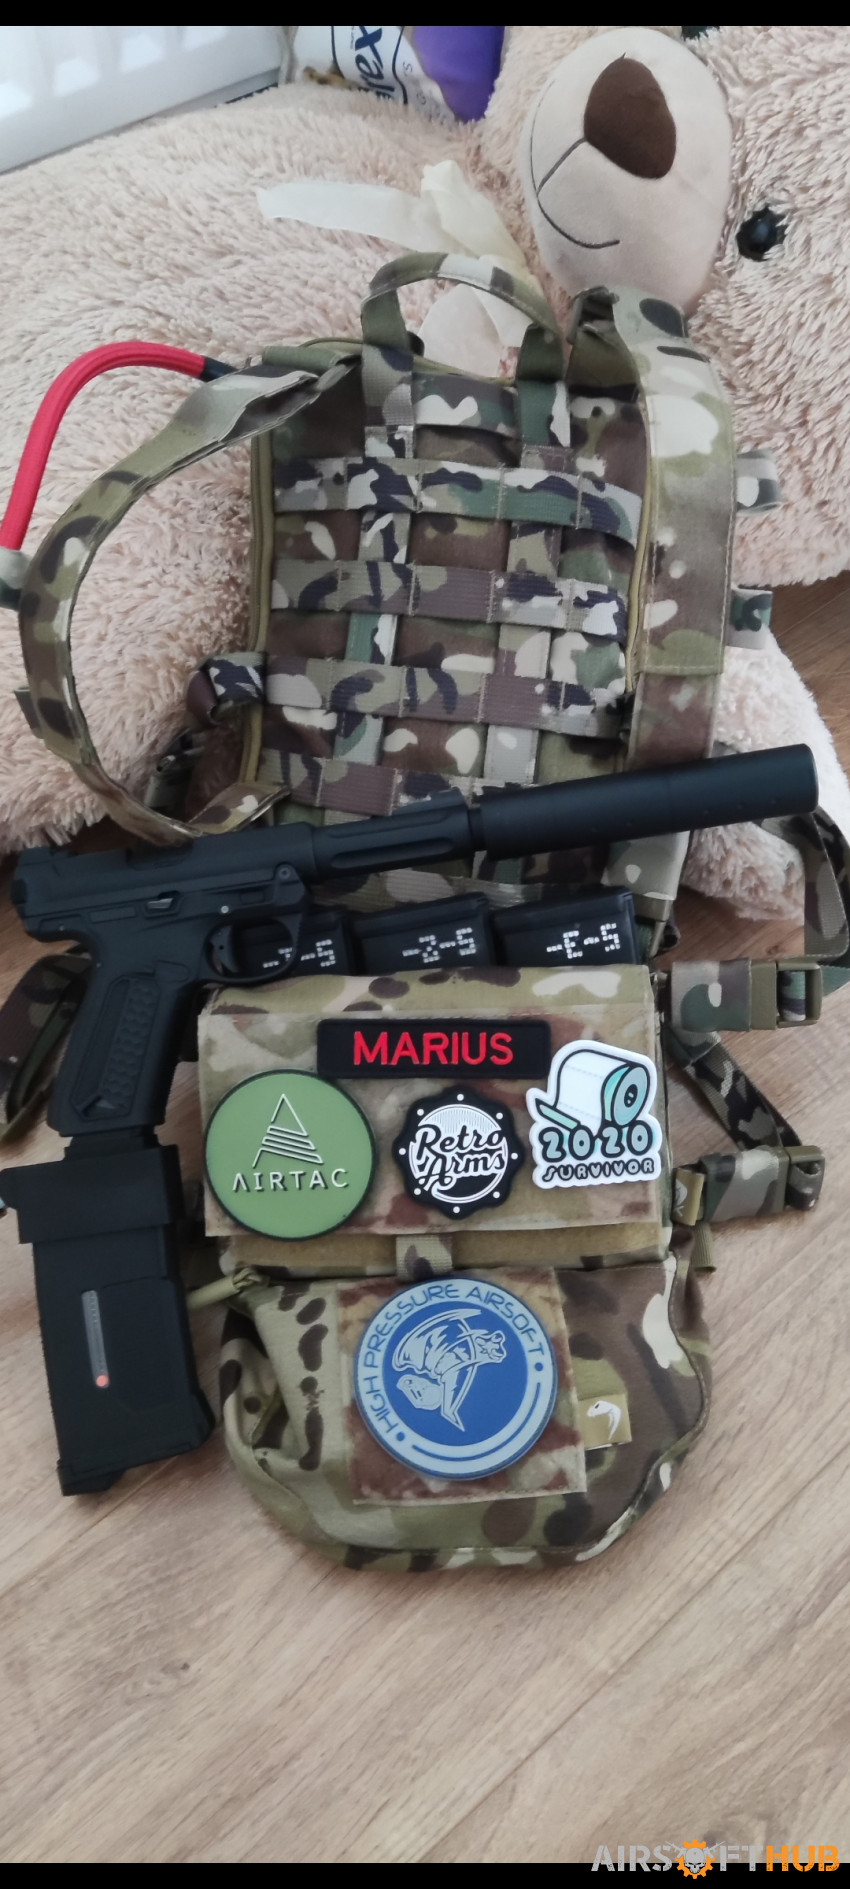 AAP-01 Wanted - Used airsoft equipment